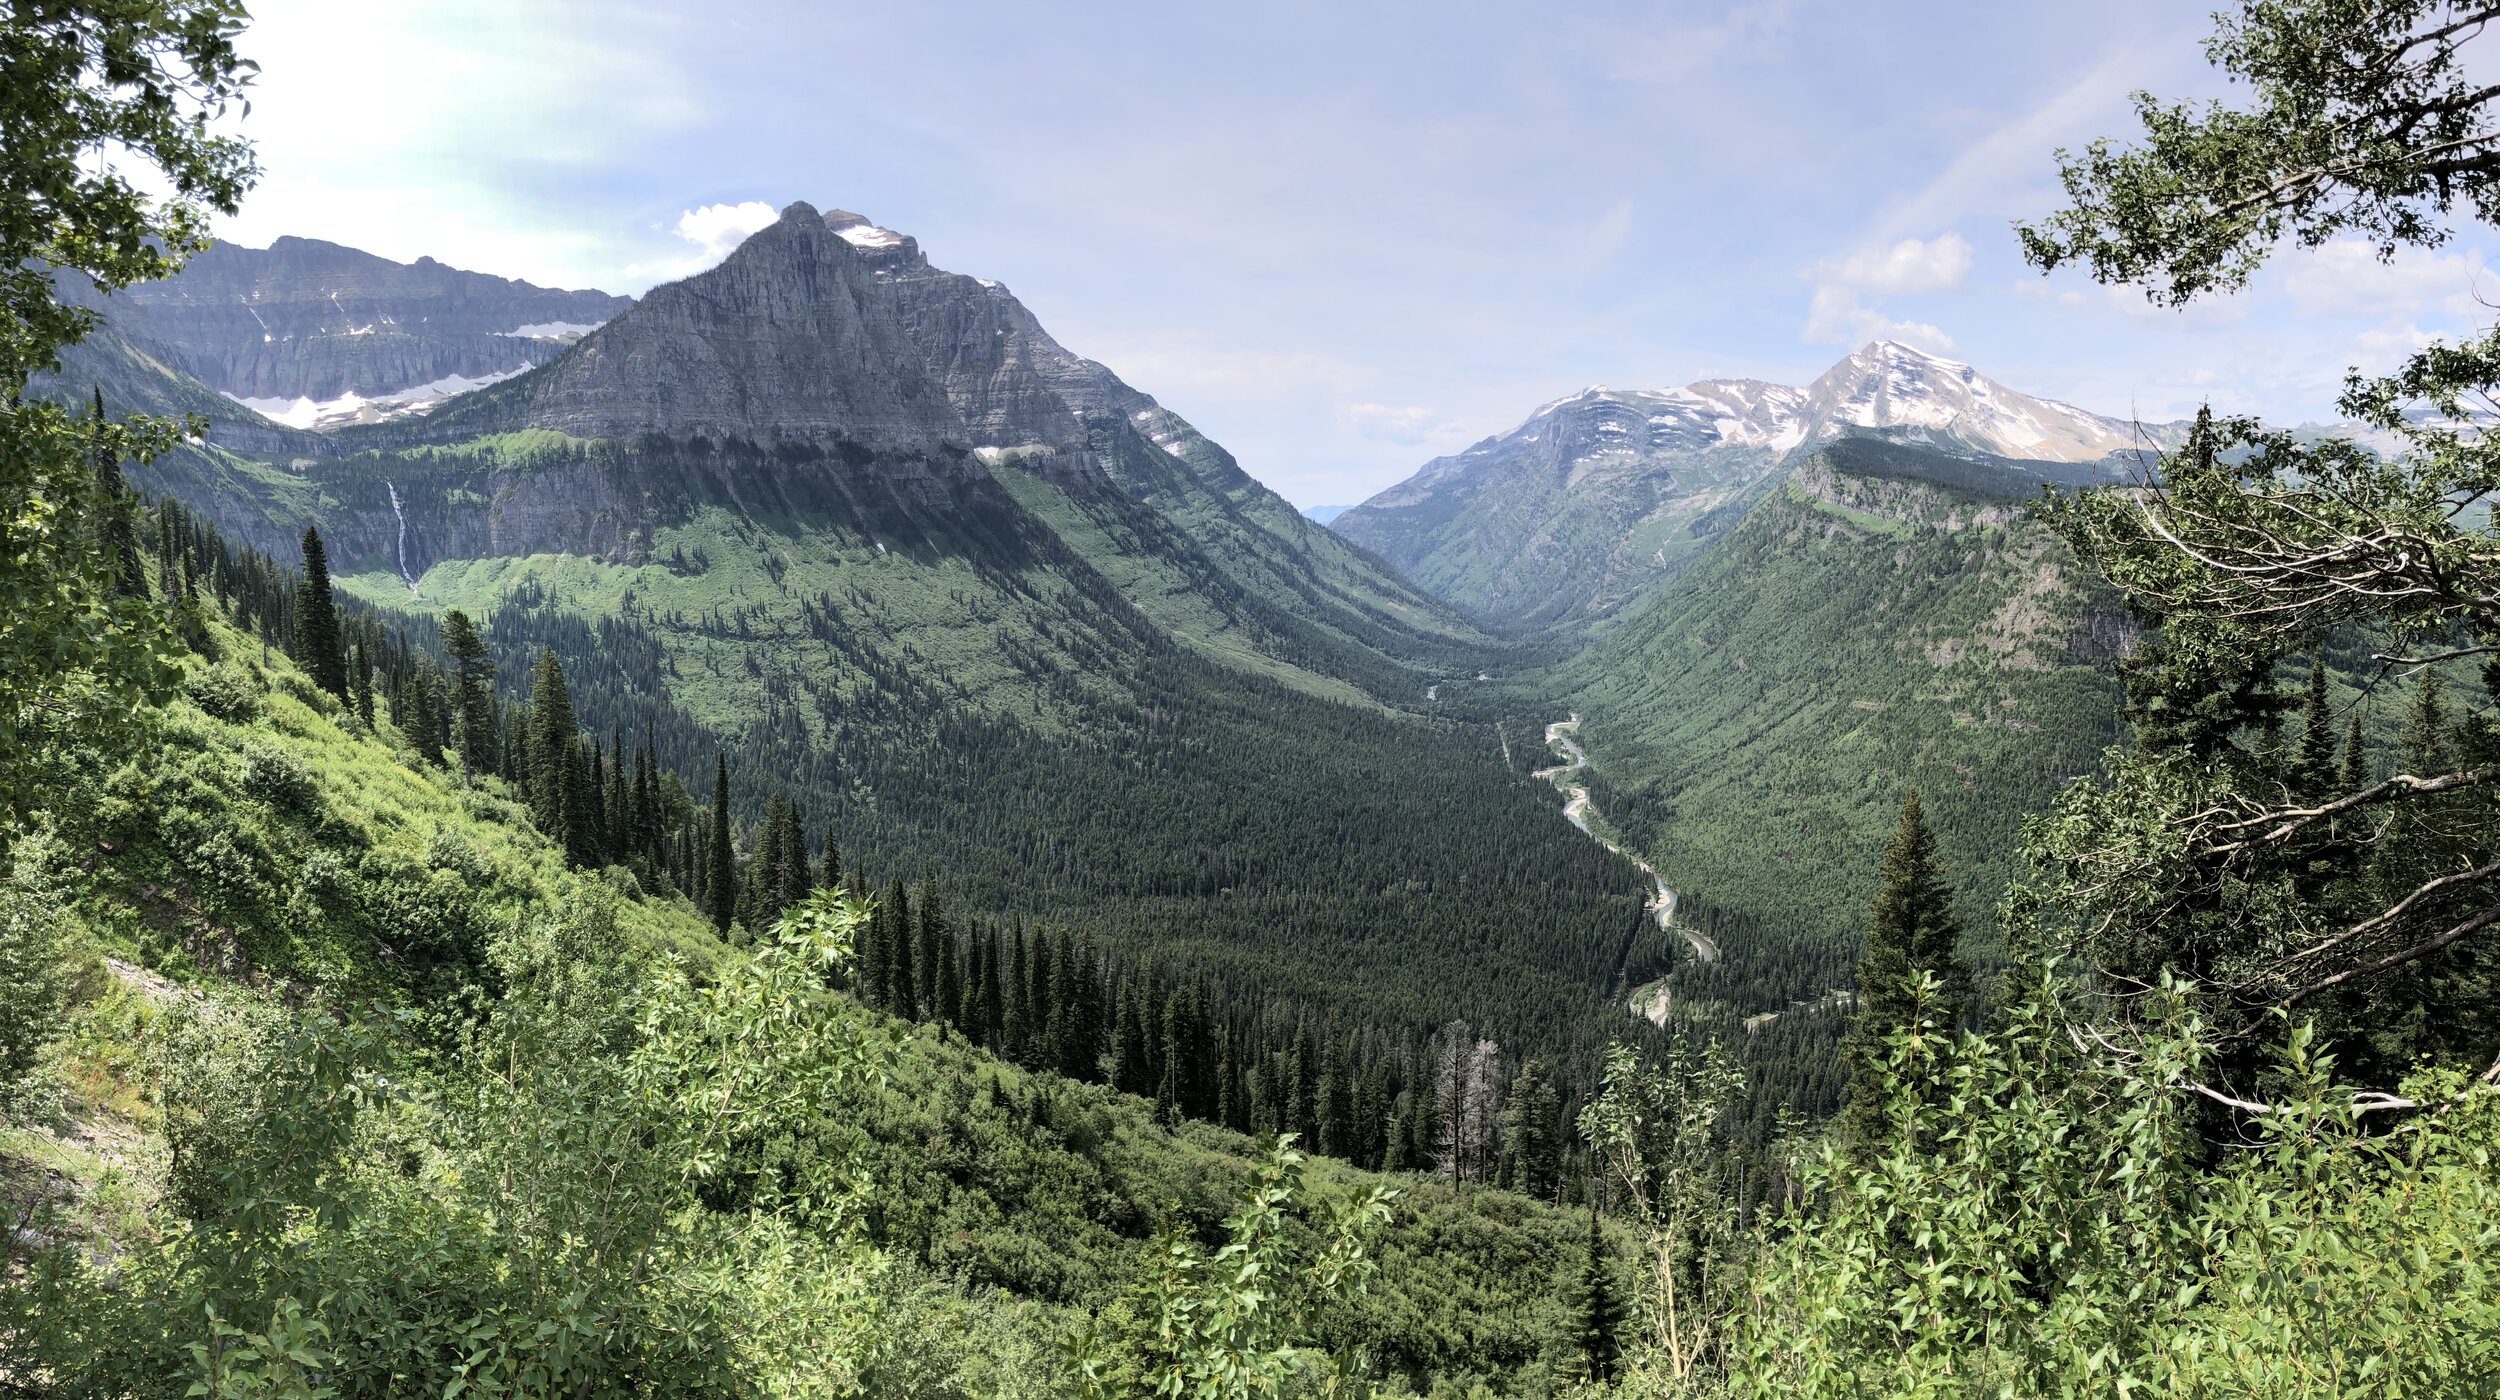 The park’s broad U-shaped valleys are characteristic of the effects of glaciers on the landscape.